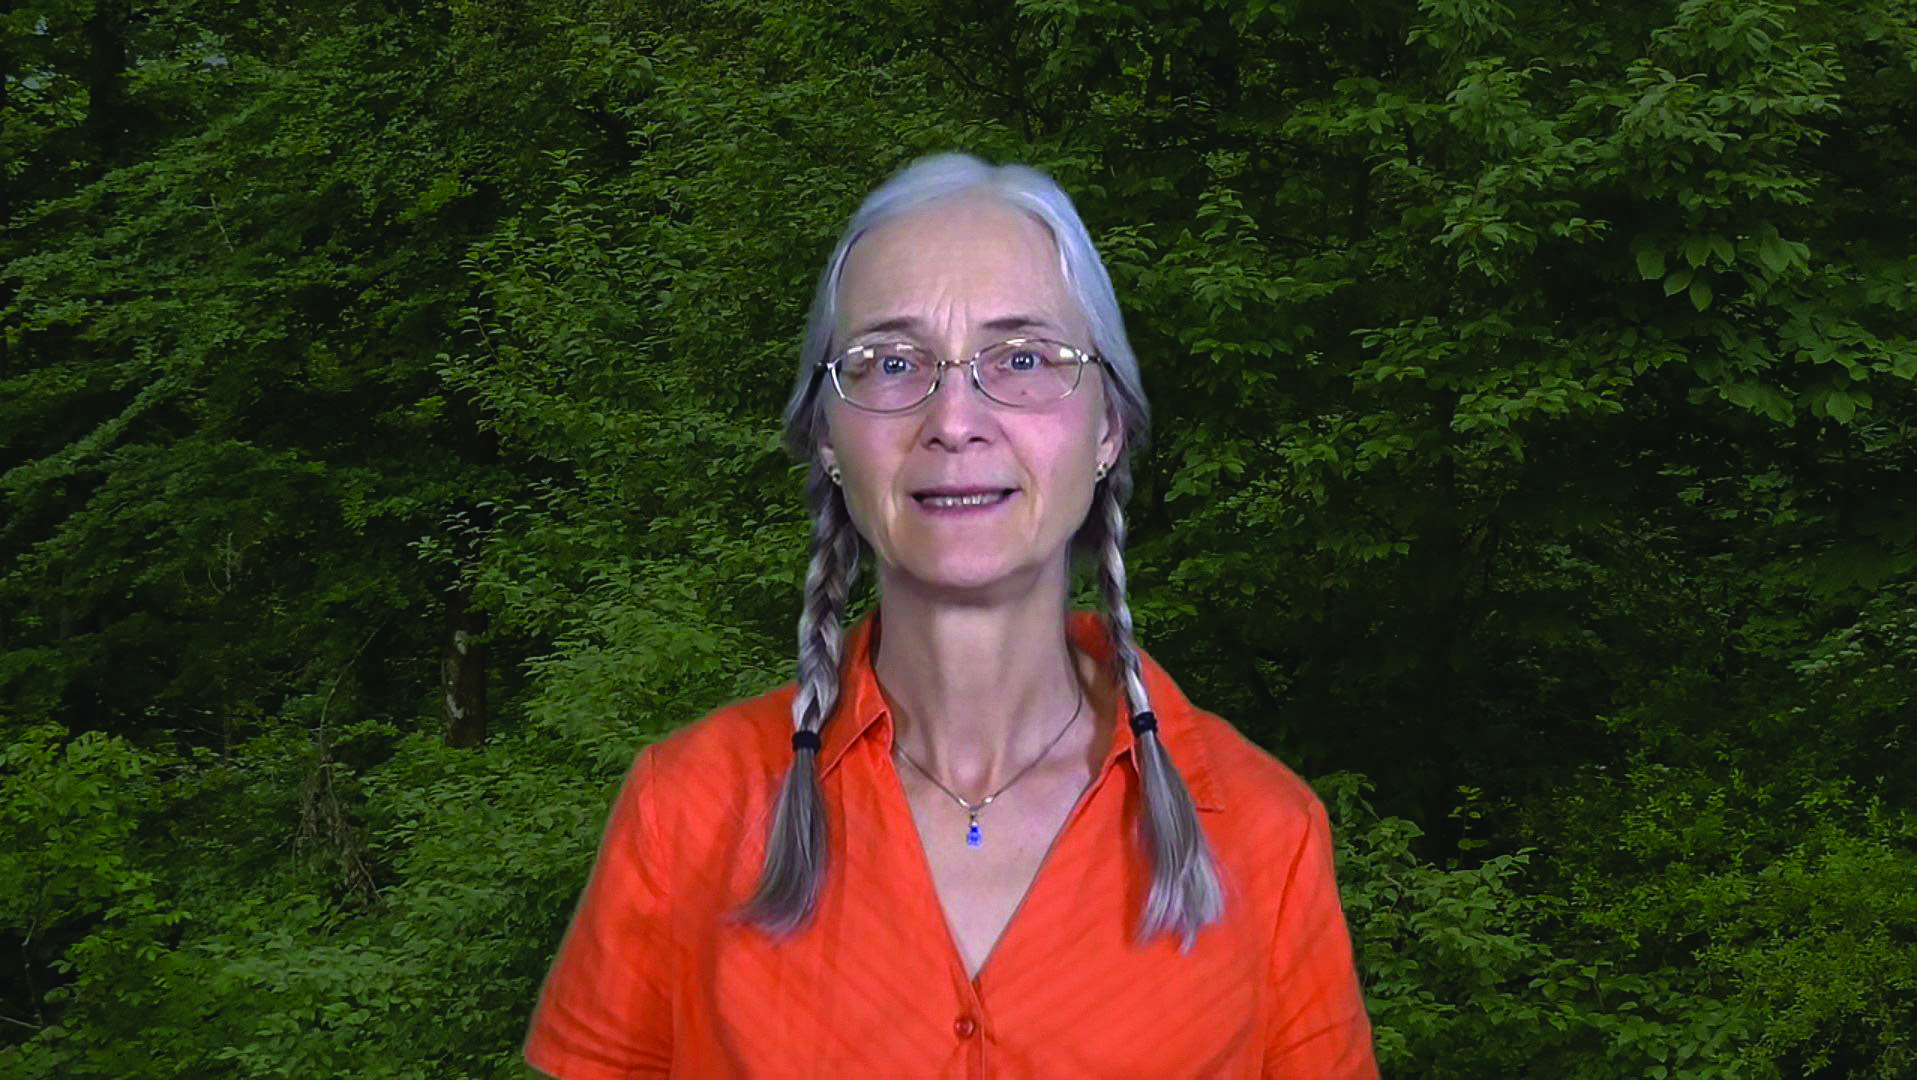 Monika Schaefer is shown in a 2016 YouTube video denying the Holocaust. A former federal Green candidate disavowed by the party after she published a self-made video denying the Holocaust is on trial in Germany for incitement of hatred. Monika Schaefer ran unsuccessfully for the Greens in Alberta’s Yellowhead riding in 2006, 2008 and 2011, but the party rejected her as a candidate in 2015 and condemned her views the next year after the video emerged.